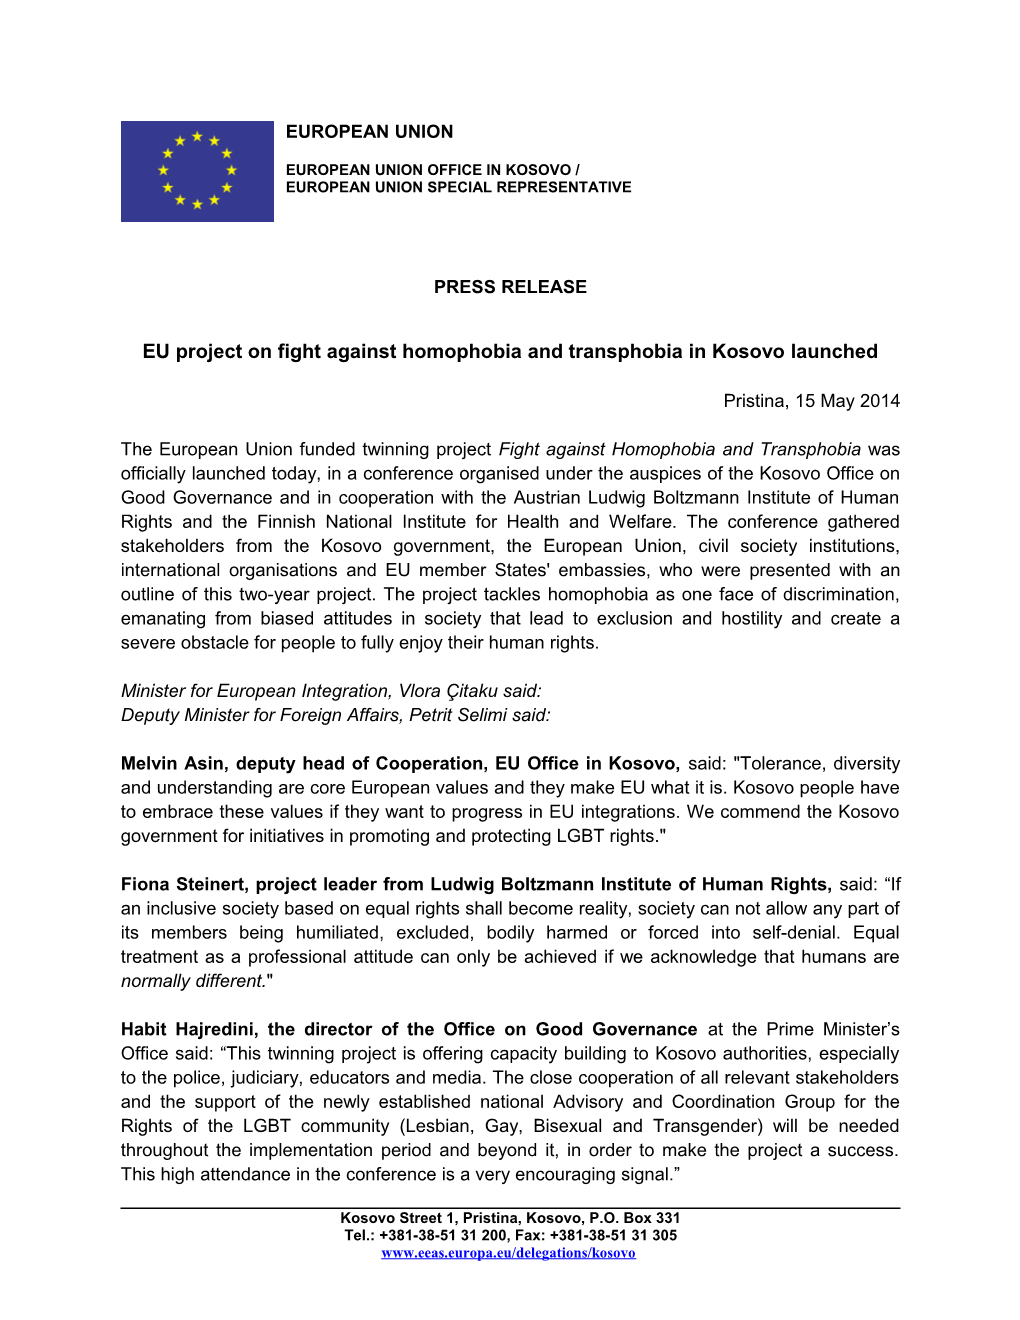 EU Project on Fight Against Homophobia and Transphobia in Kosovo Launched